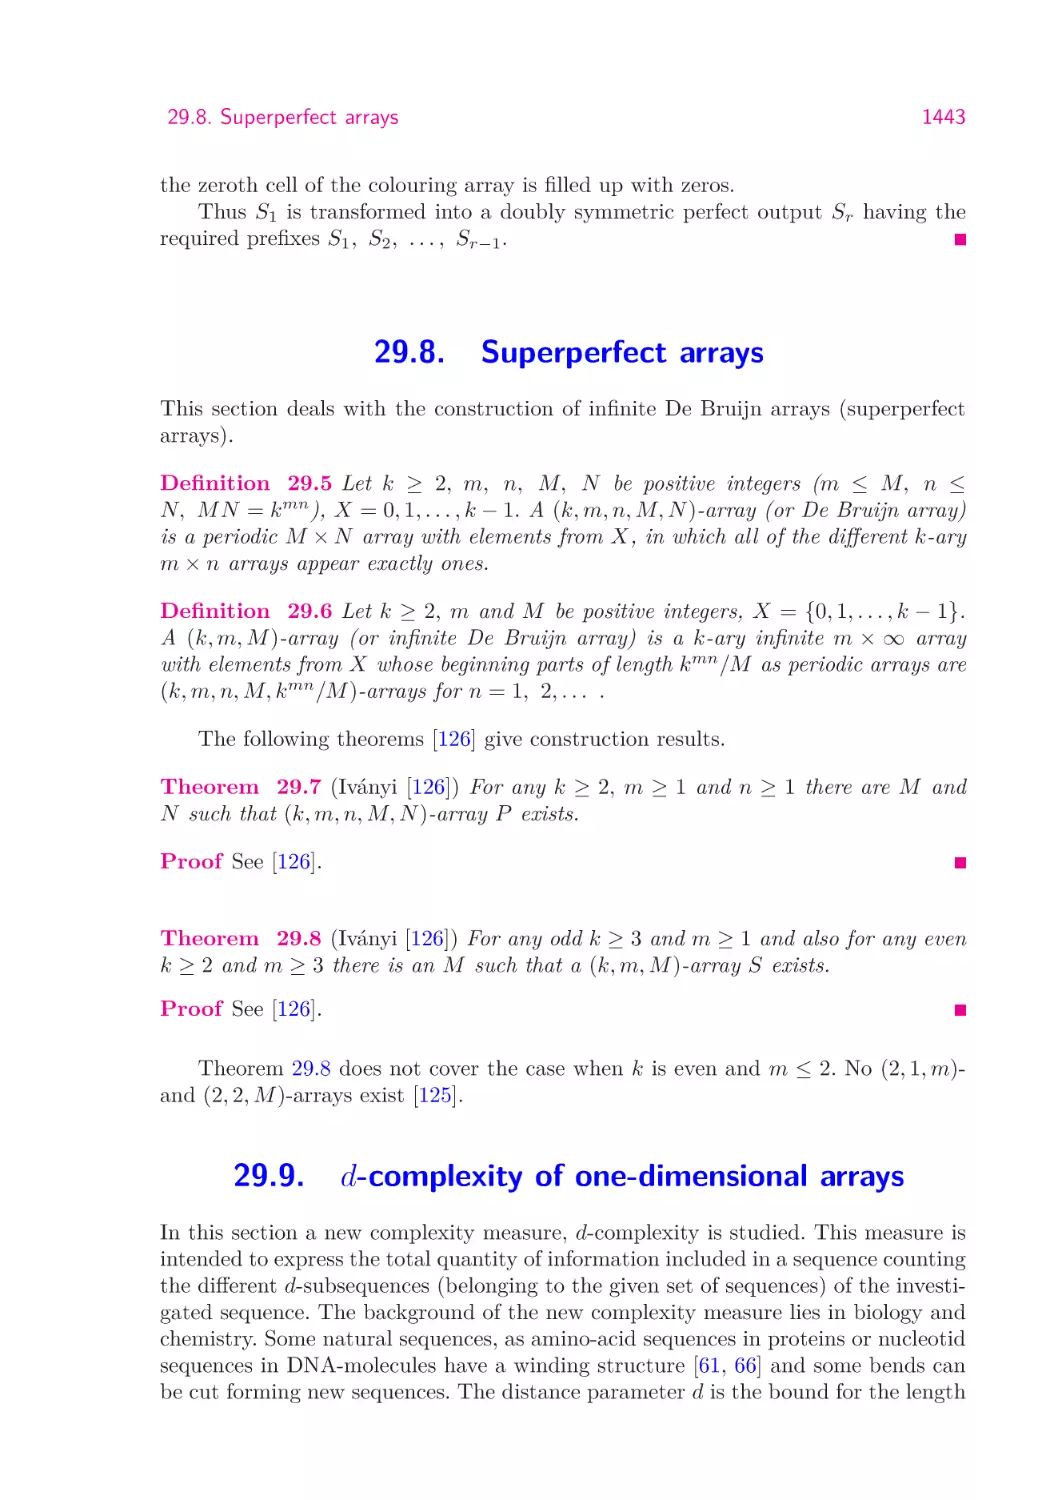 29.8.   Superperfect arrays
29.9.   d-complexity of one-dimensional arrays